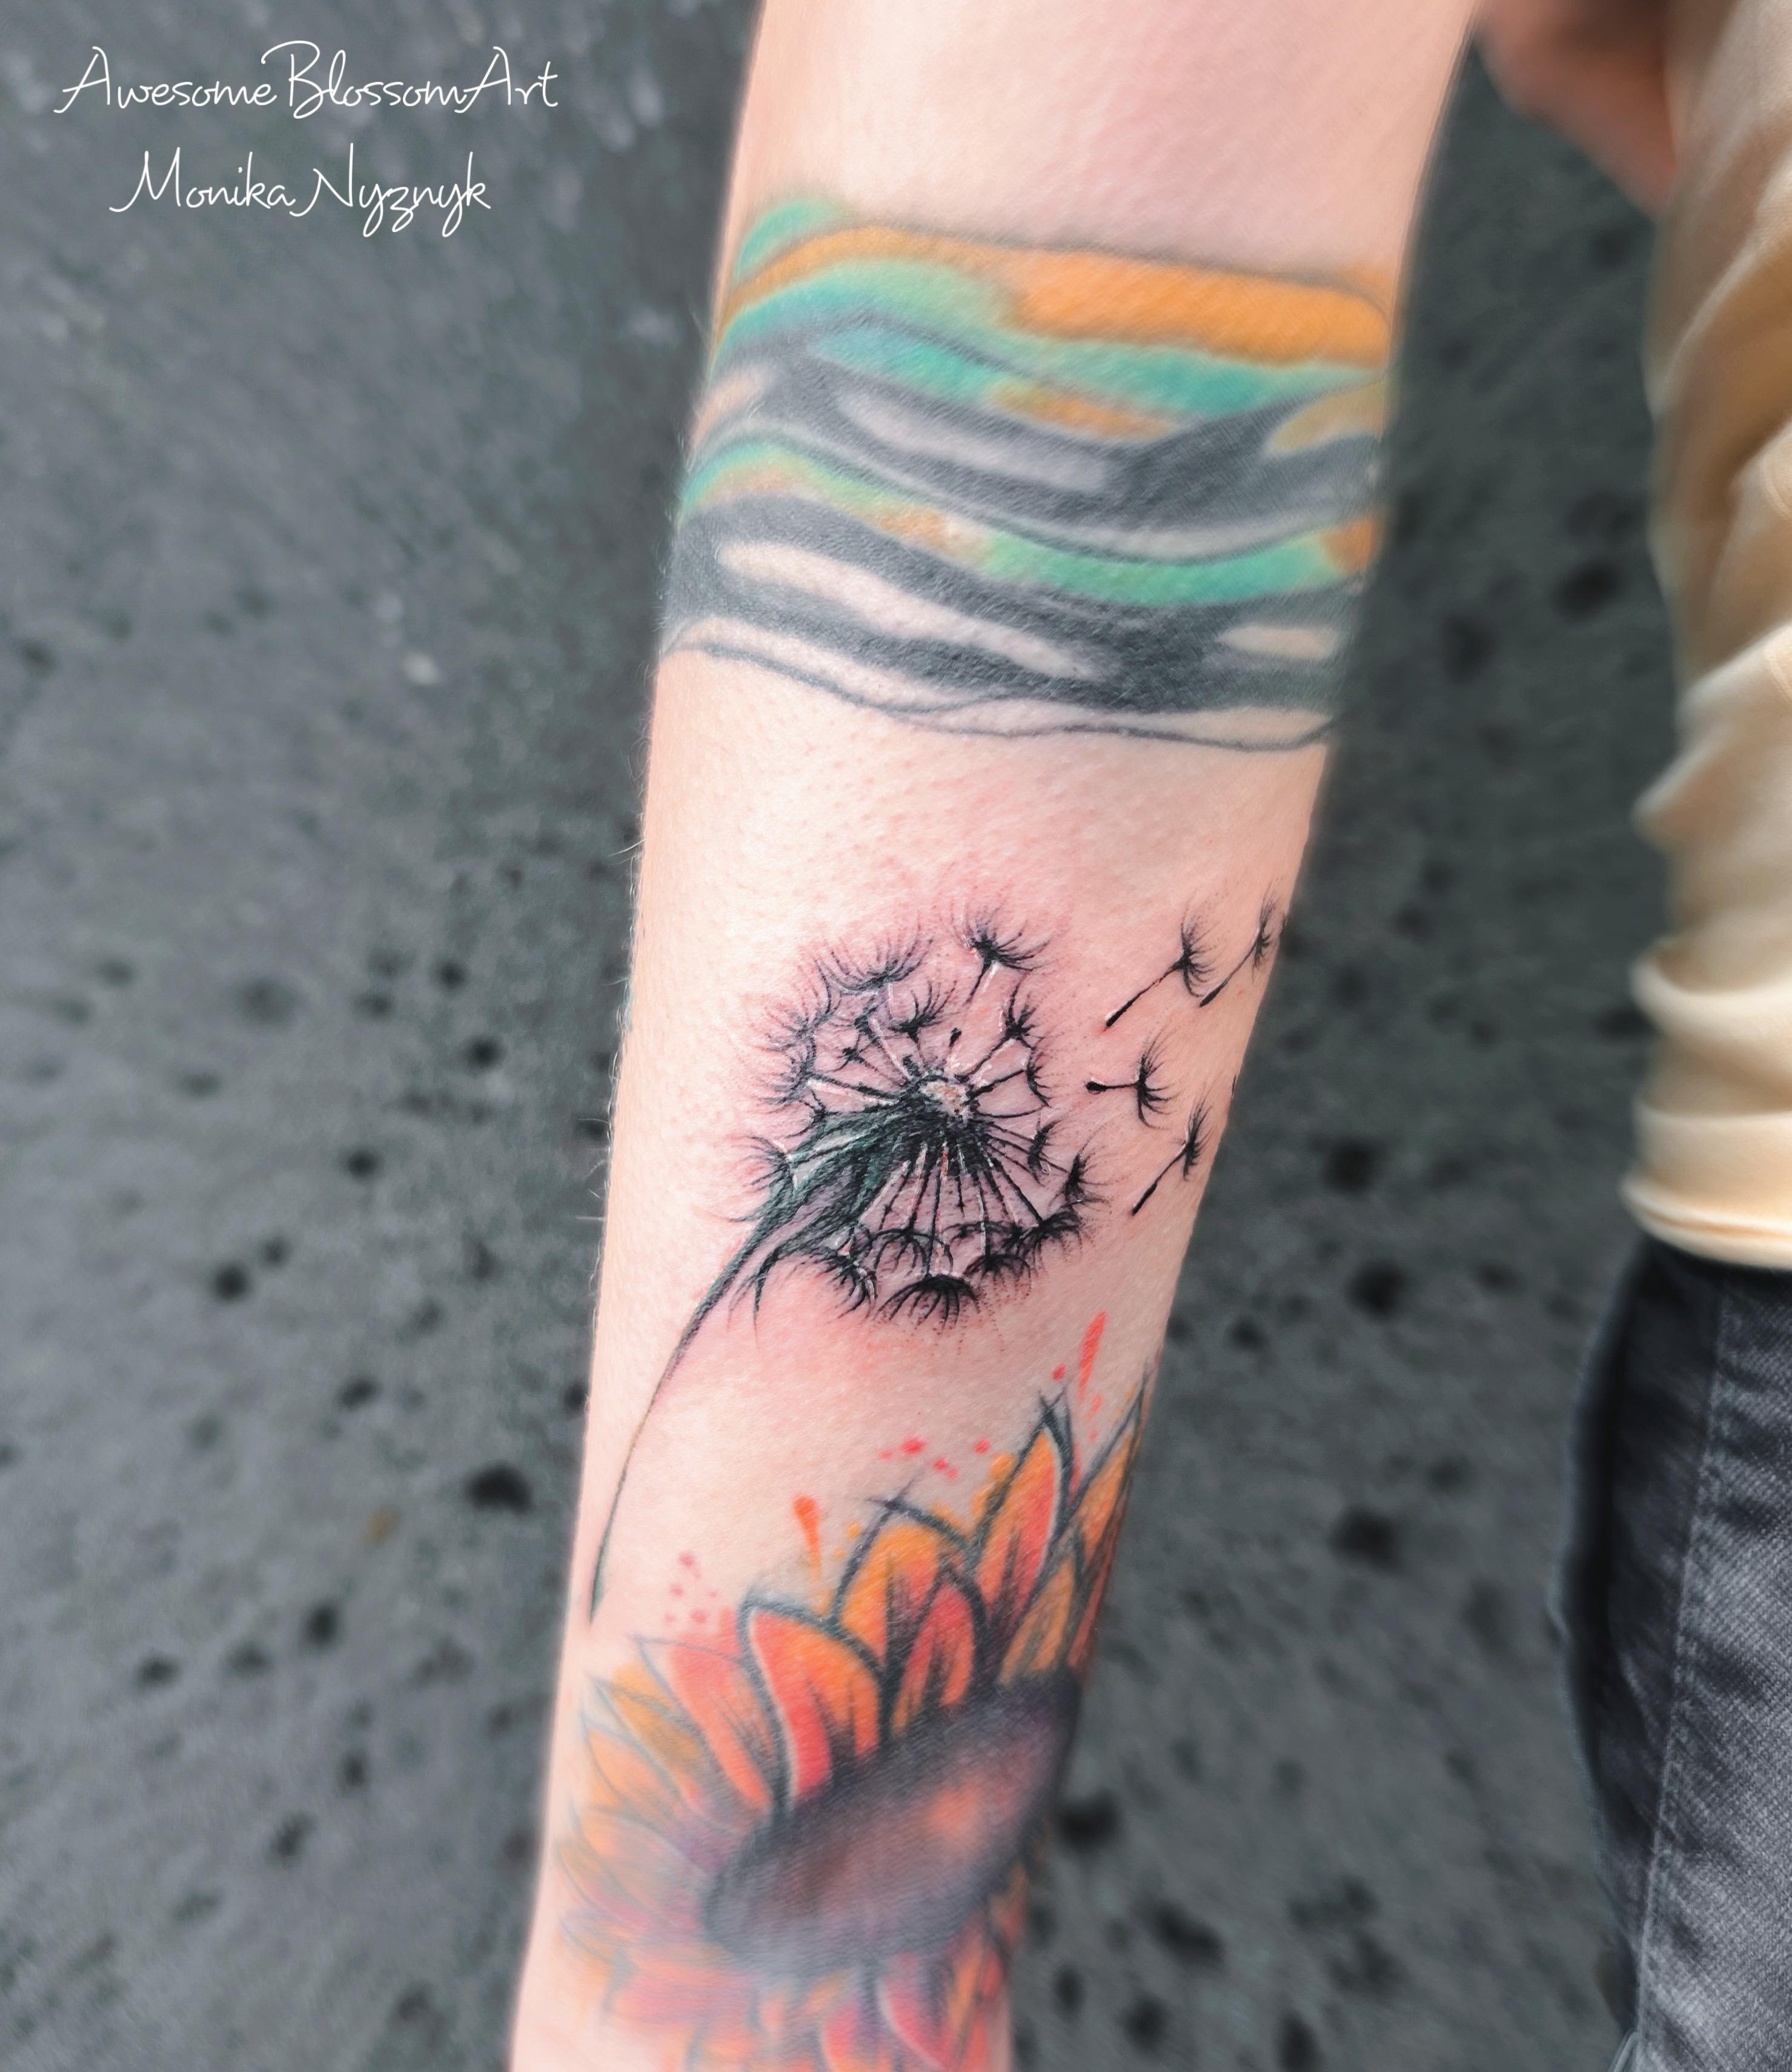 Inksearch tattoo AwesomeBlossomArt